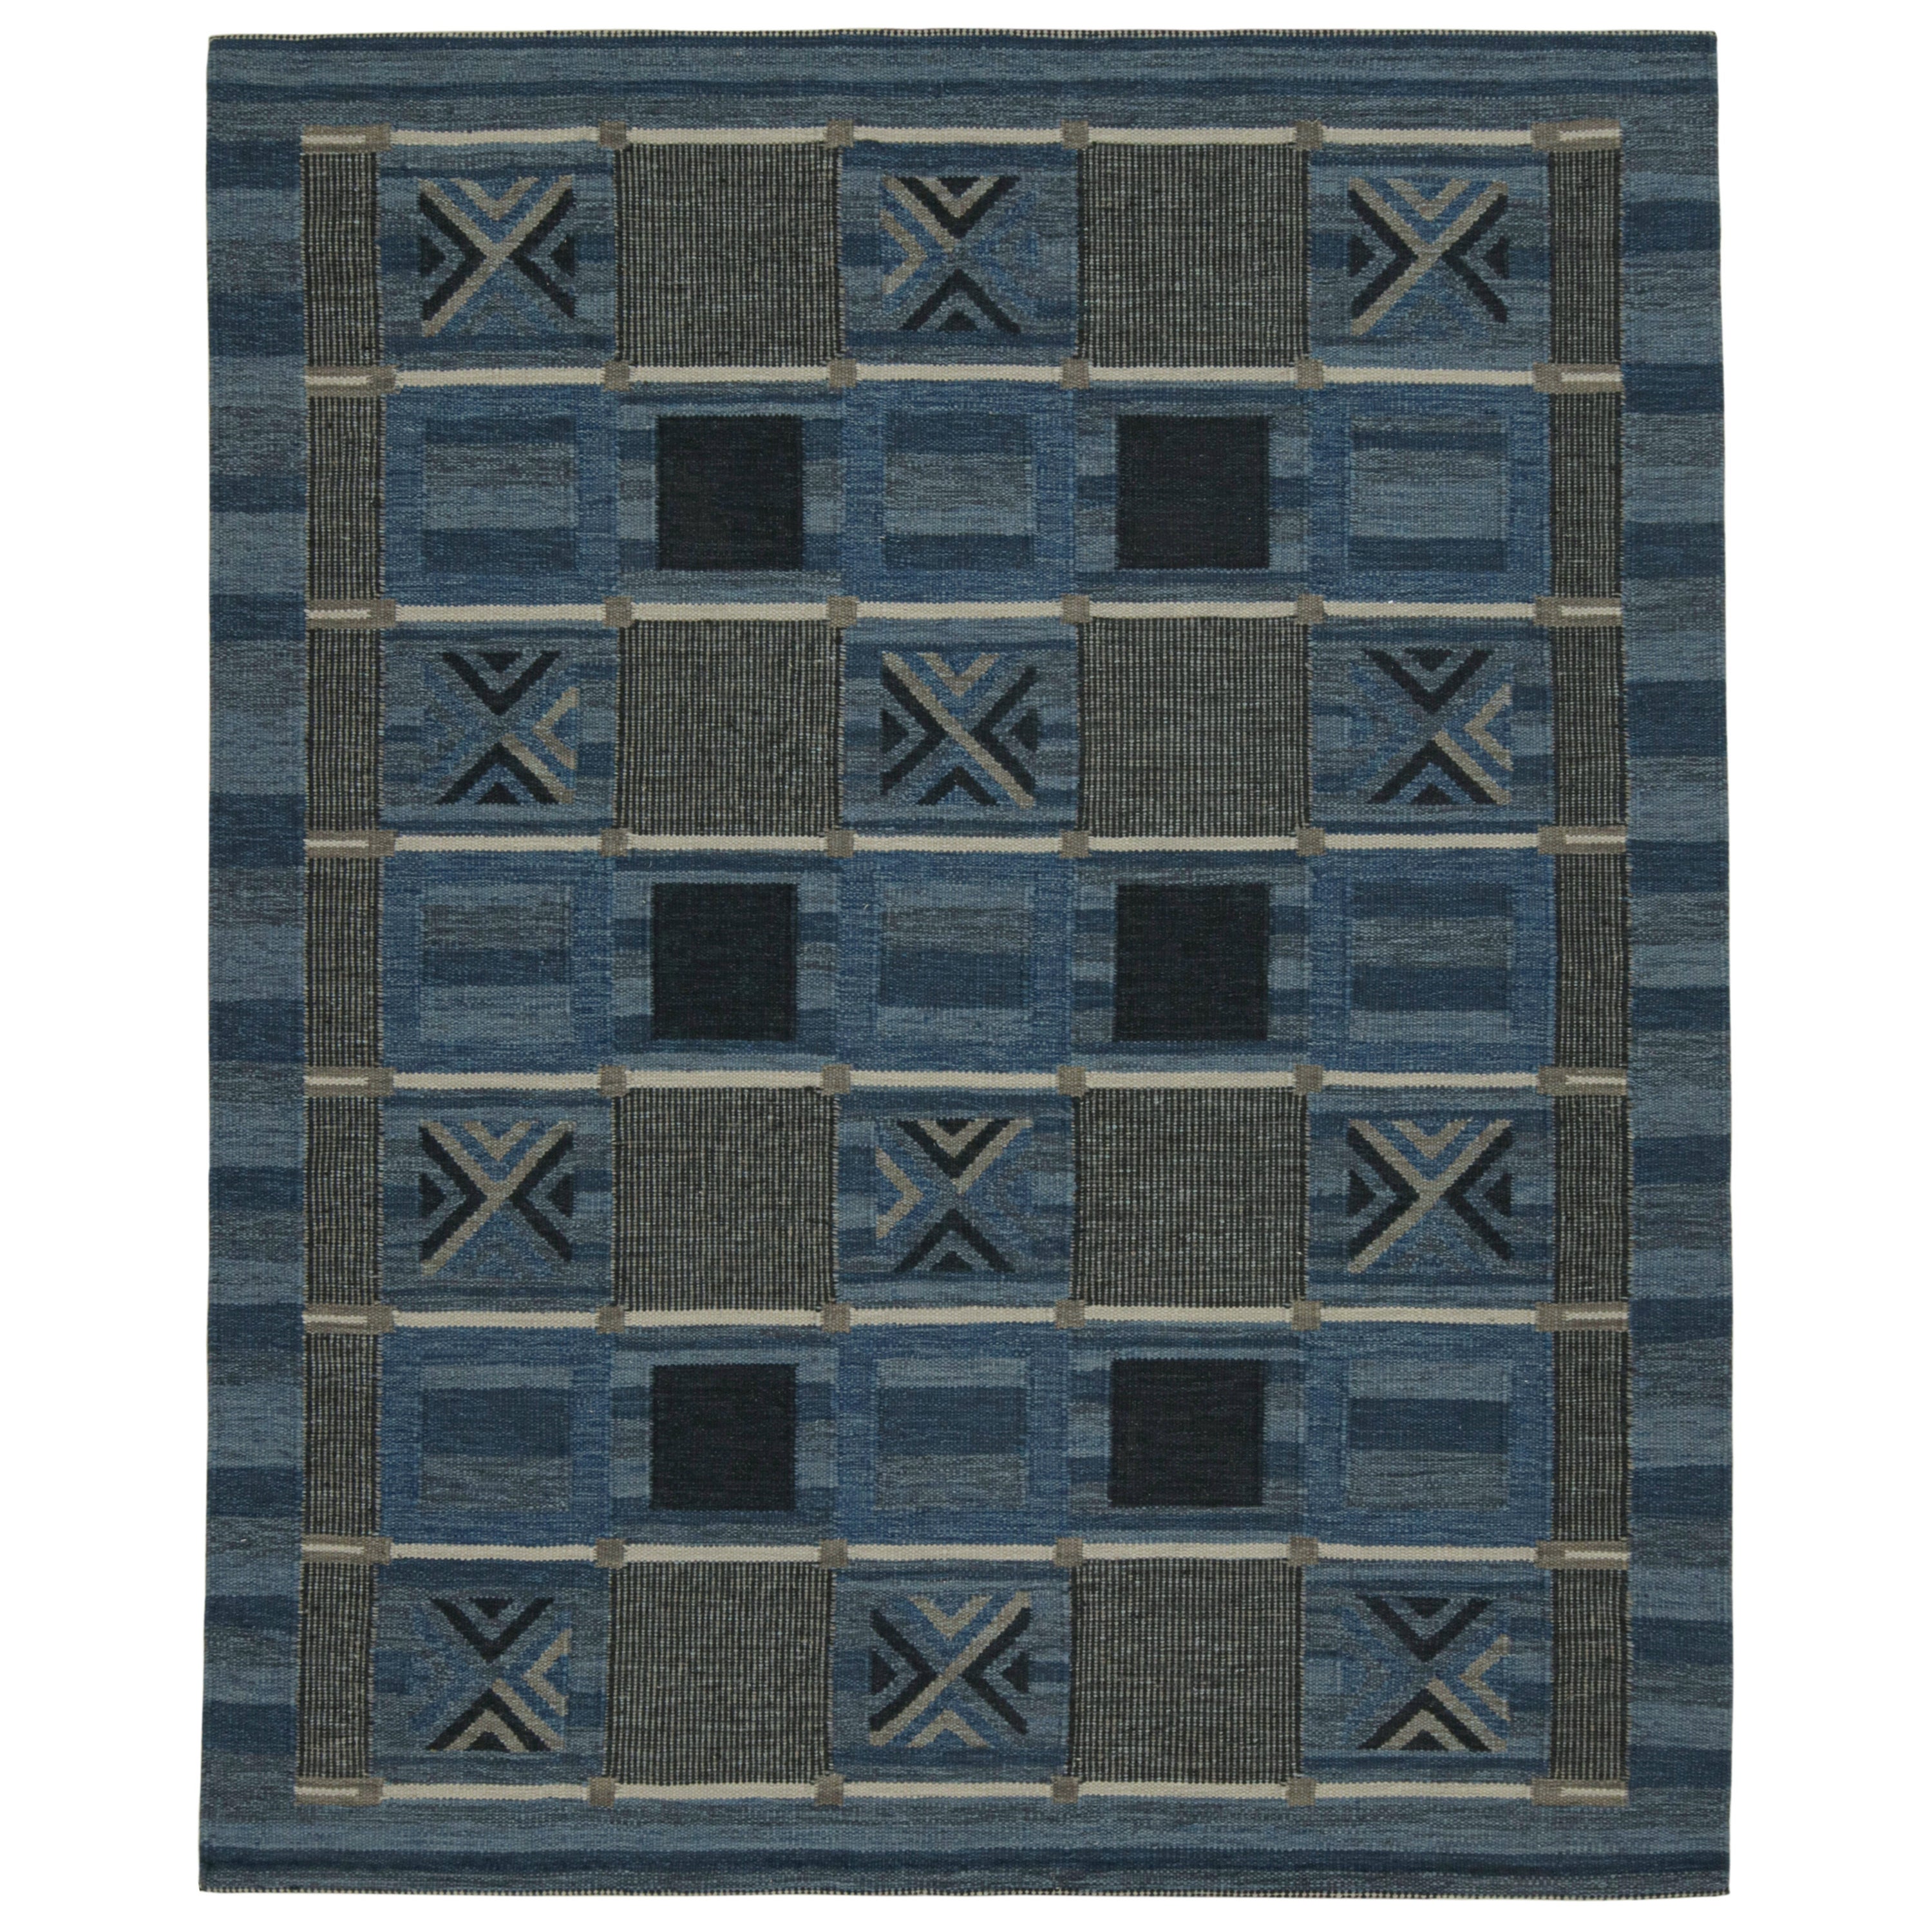 Rug & Kilim’s Scandinavian Style Kilim Rug with Blue and Gray Geometric Patterns For Sale